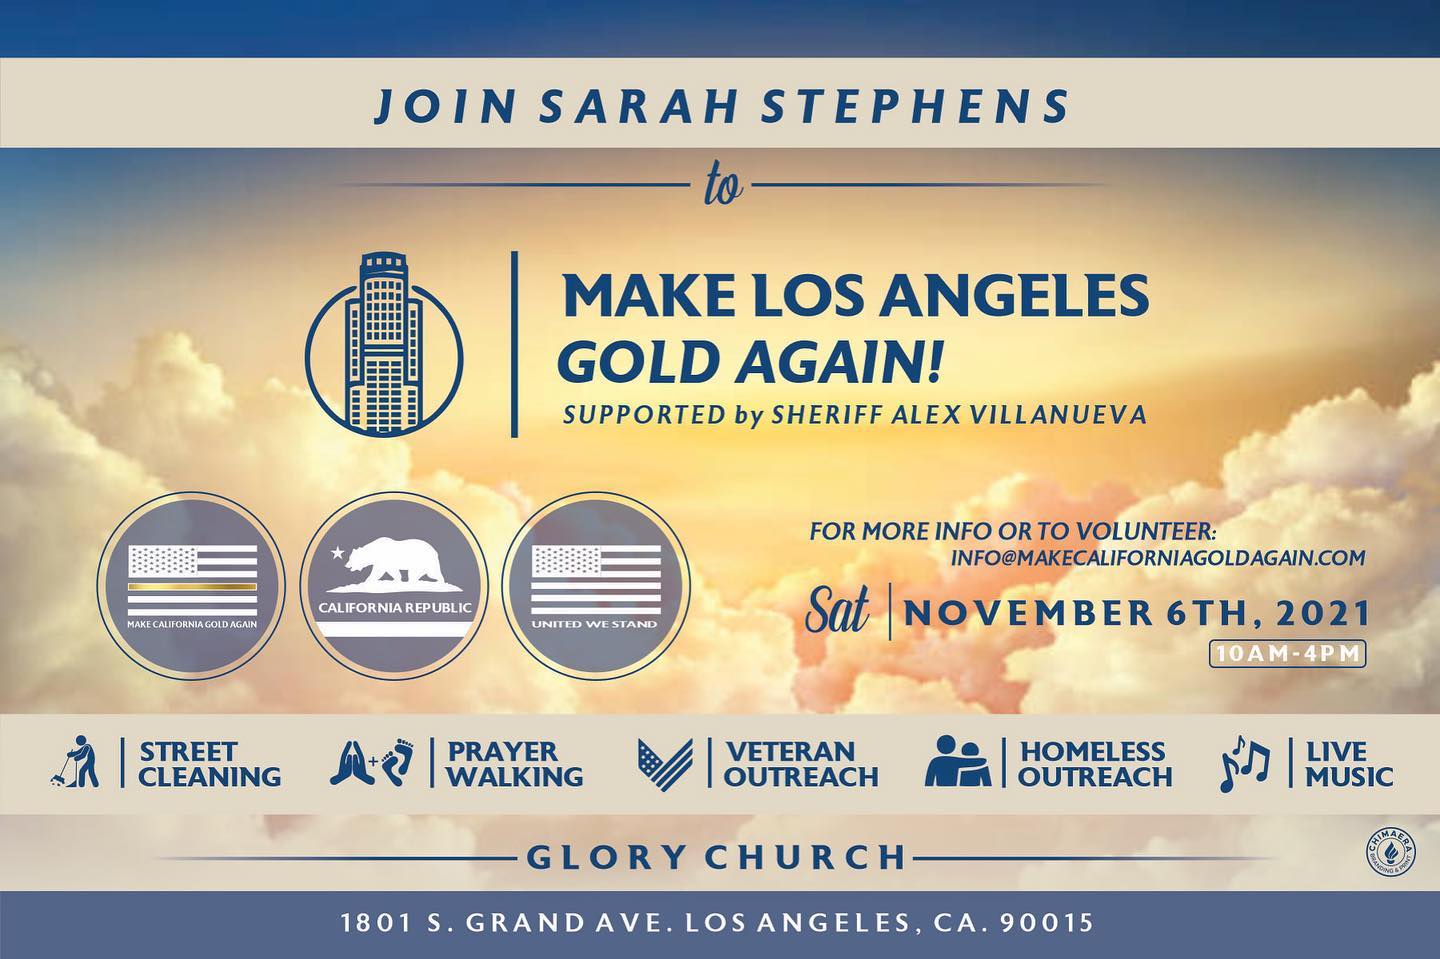 a poster for a sarah stephens gubernatorial campaign event for November 6, 2021 that says "supported by sheriff villanueva"